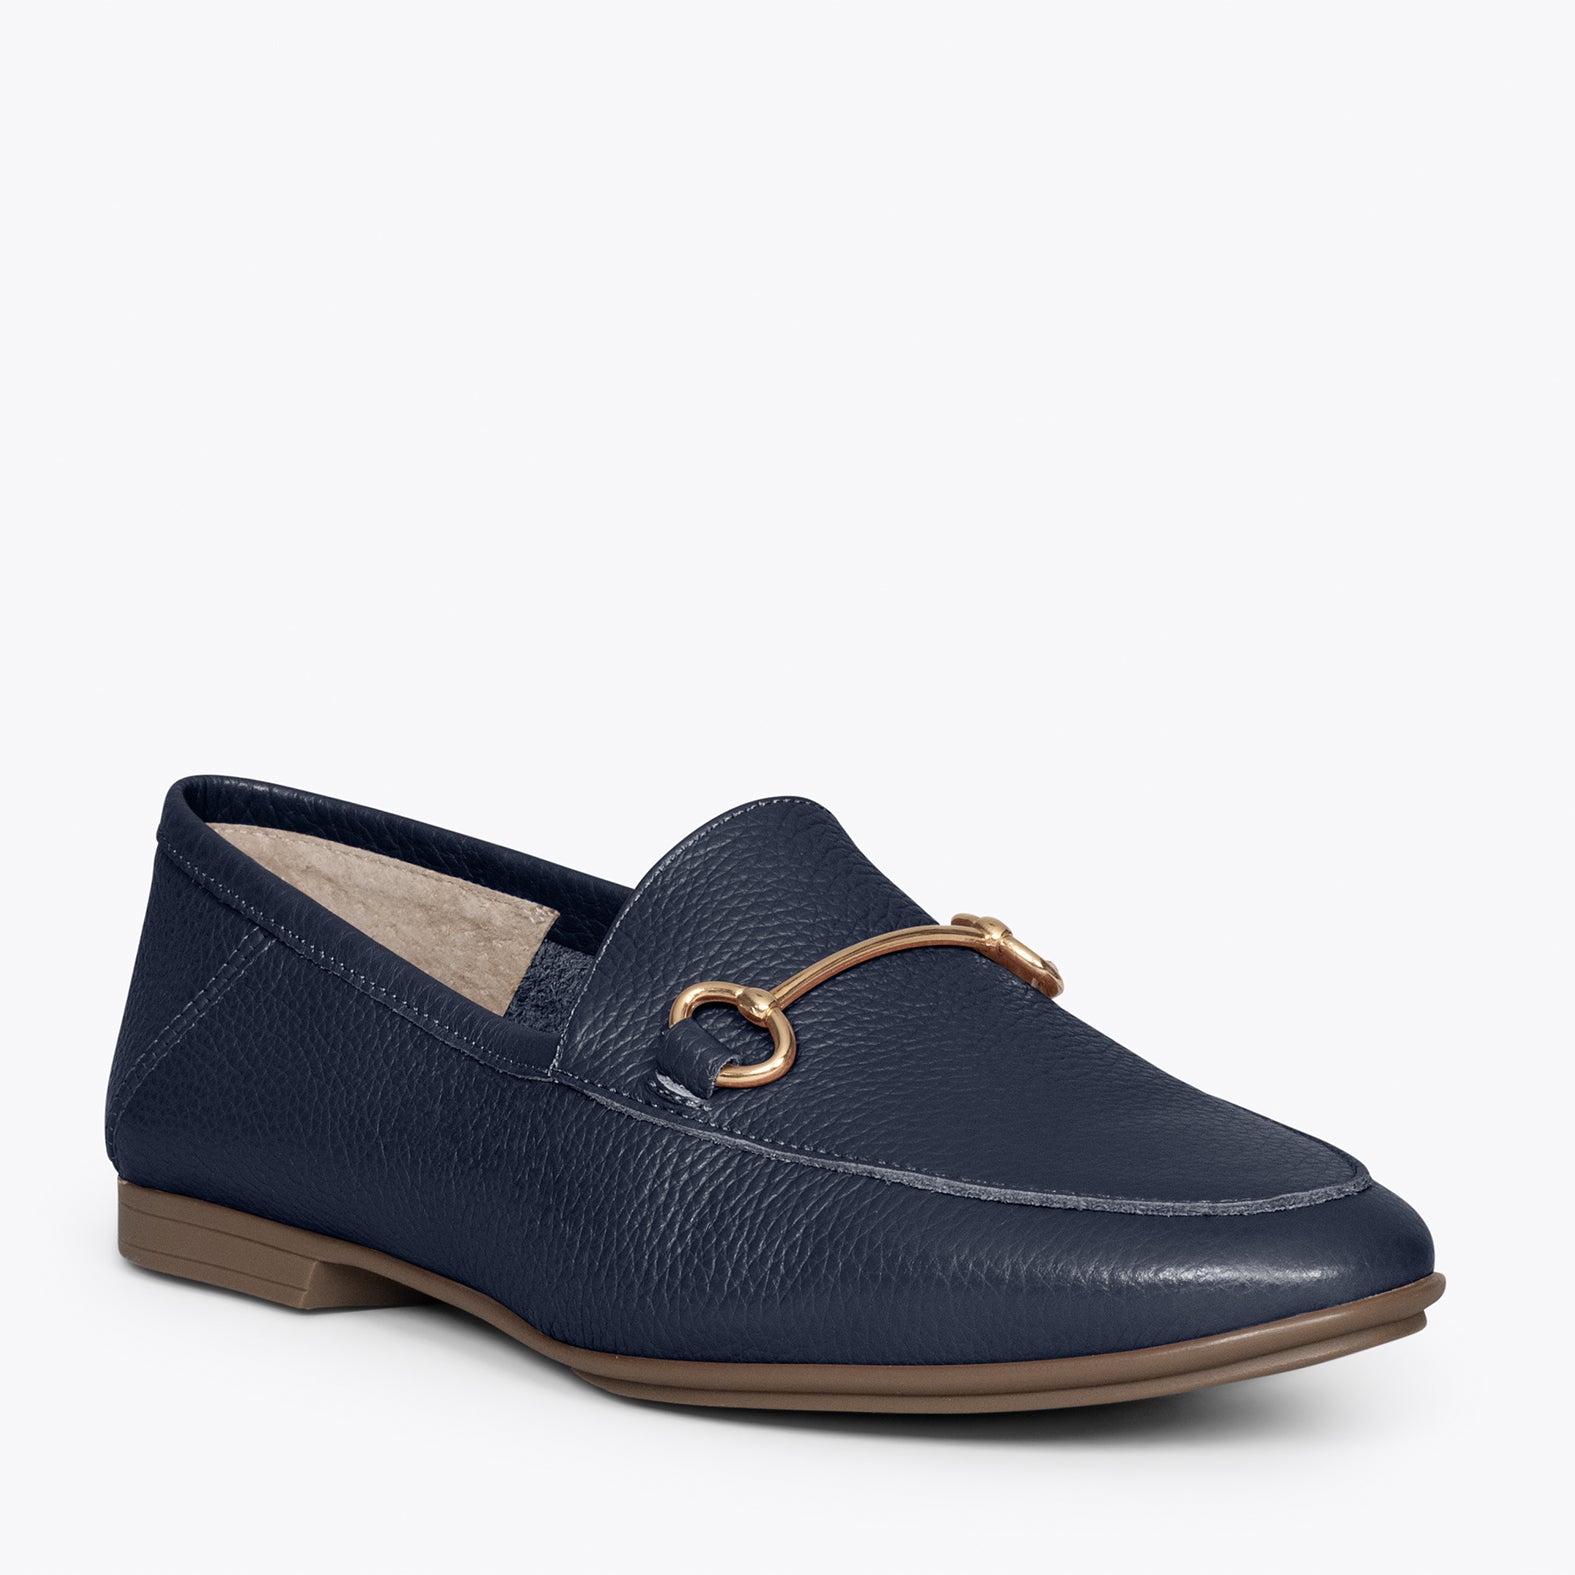 STYLE – NAVY moccasins with horsebit